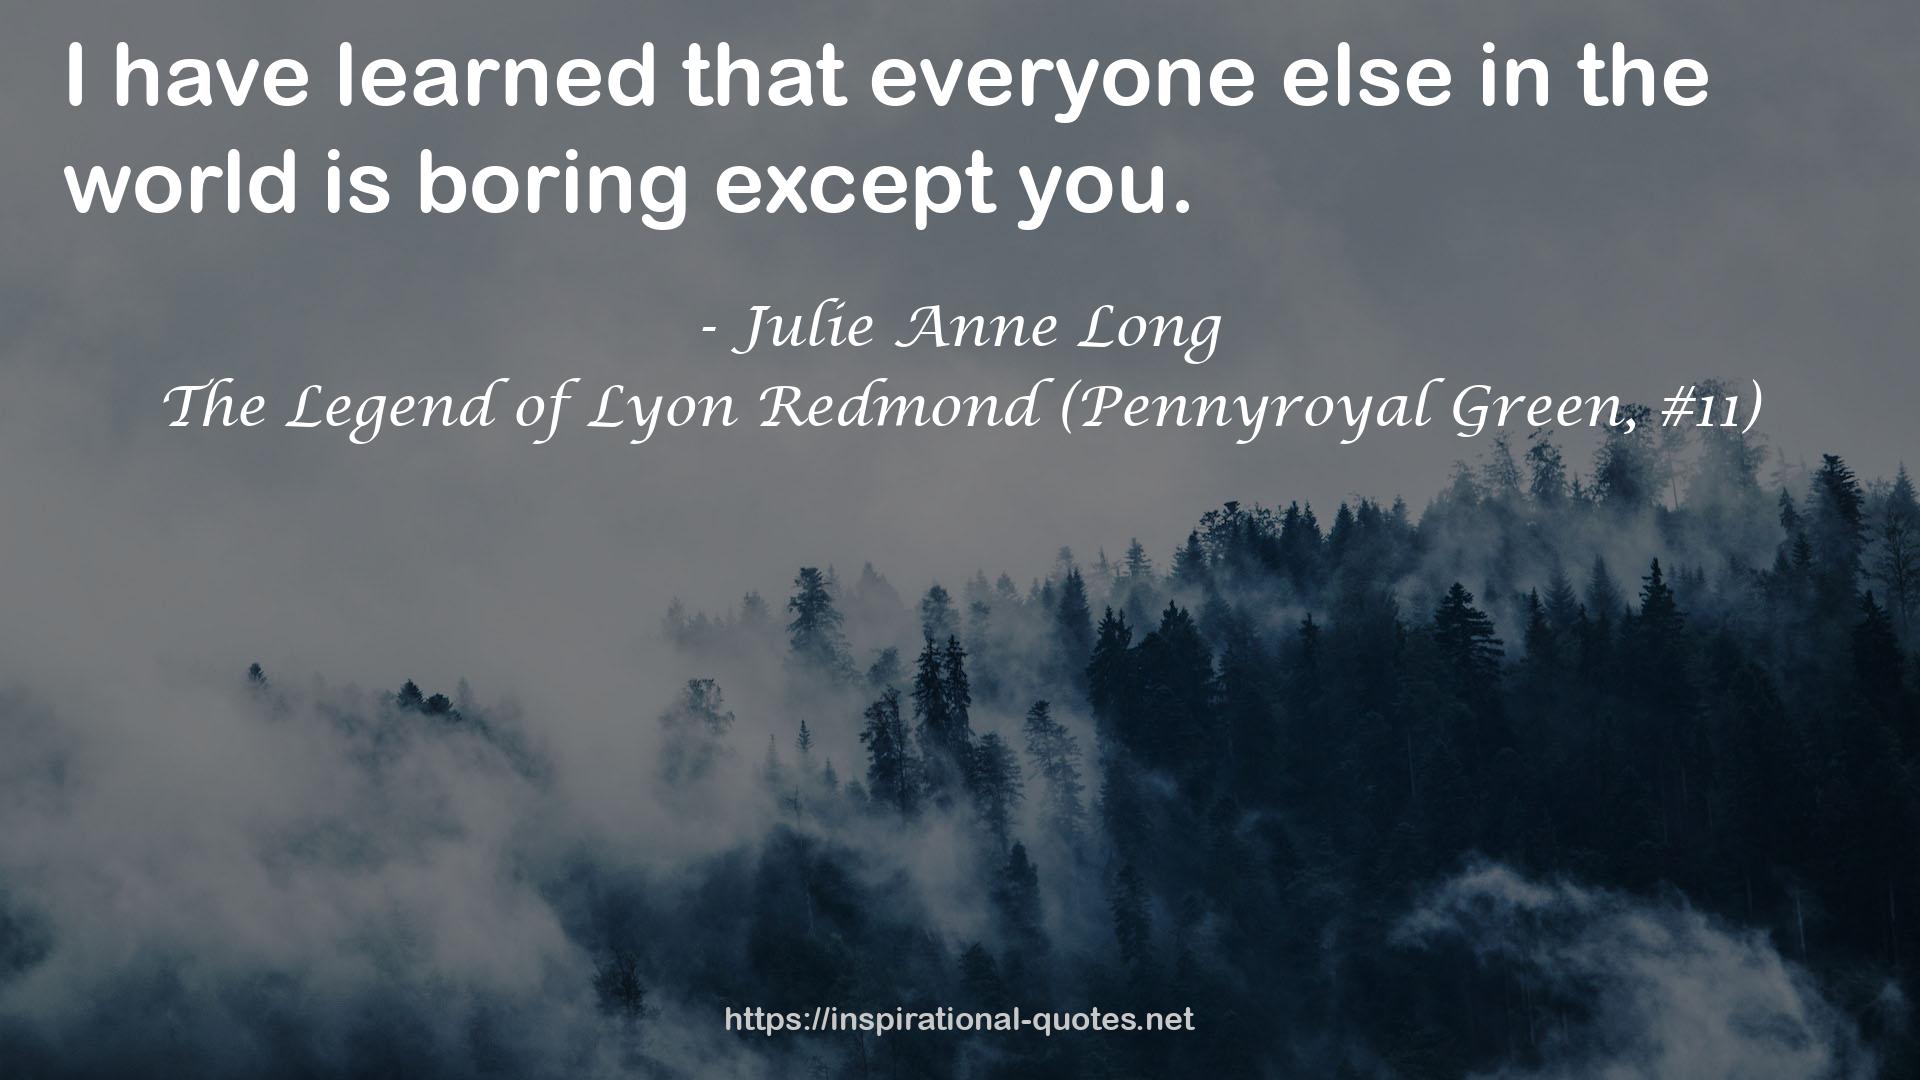 The Legend of Lyon Redmond (Pennyroyal Green, #11) QUOTES